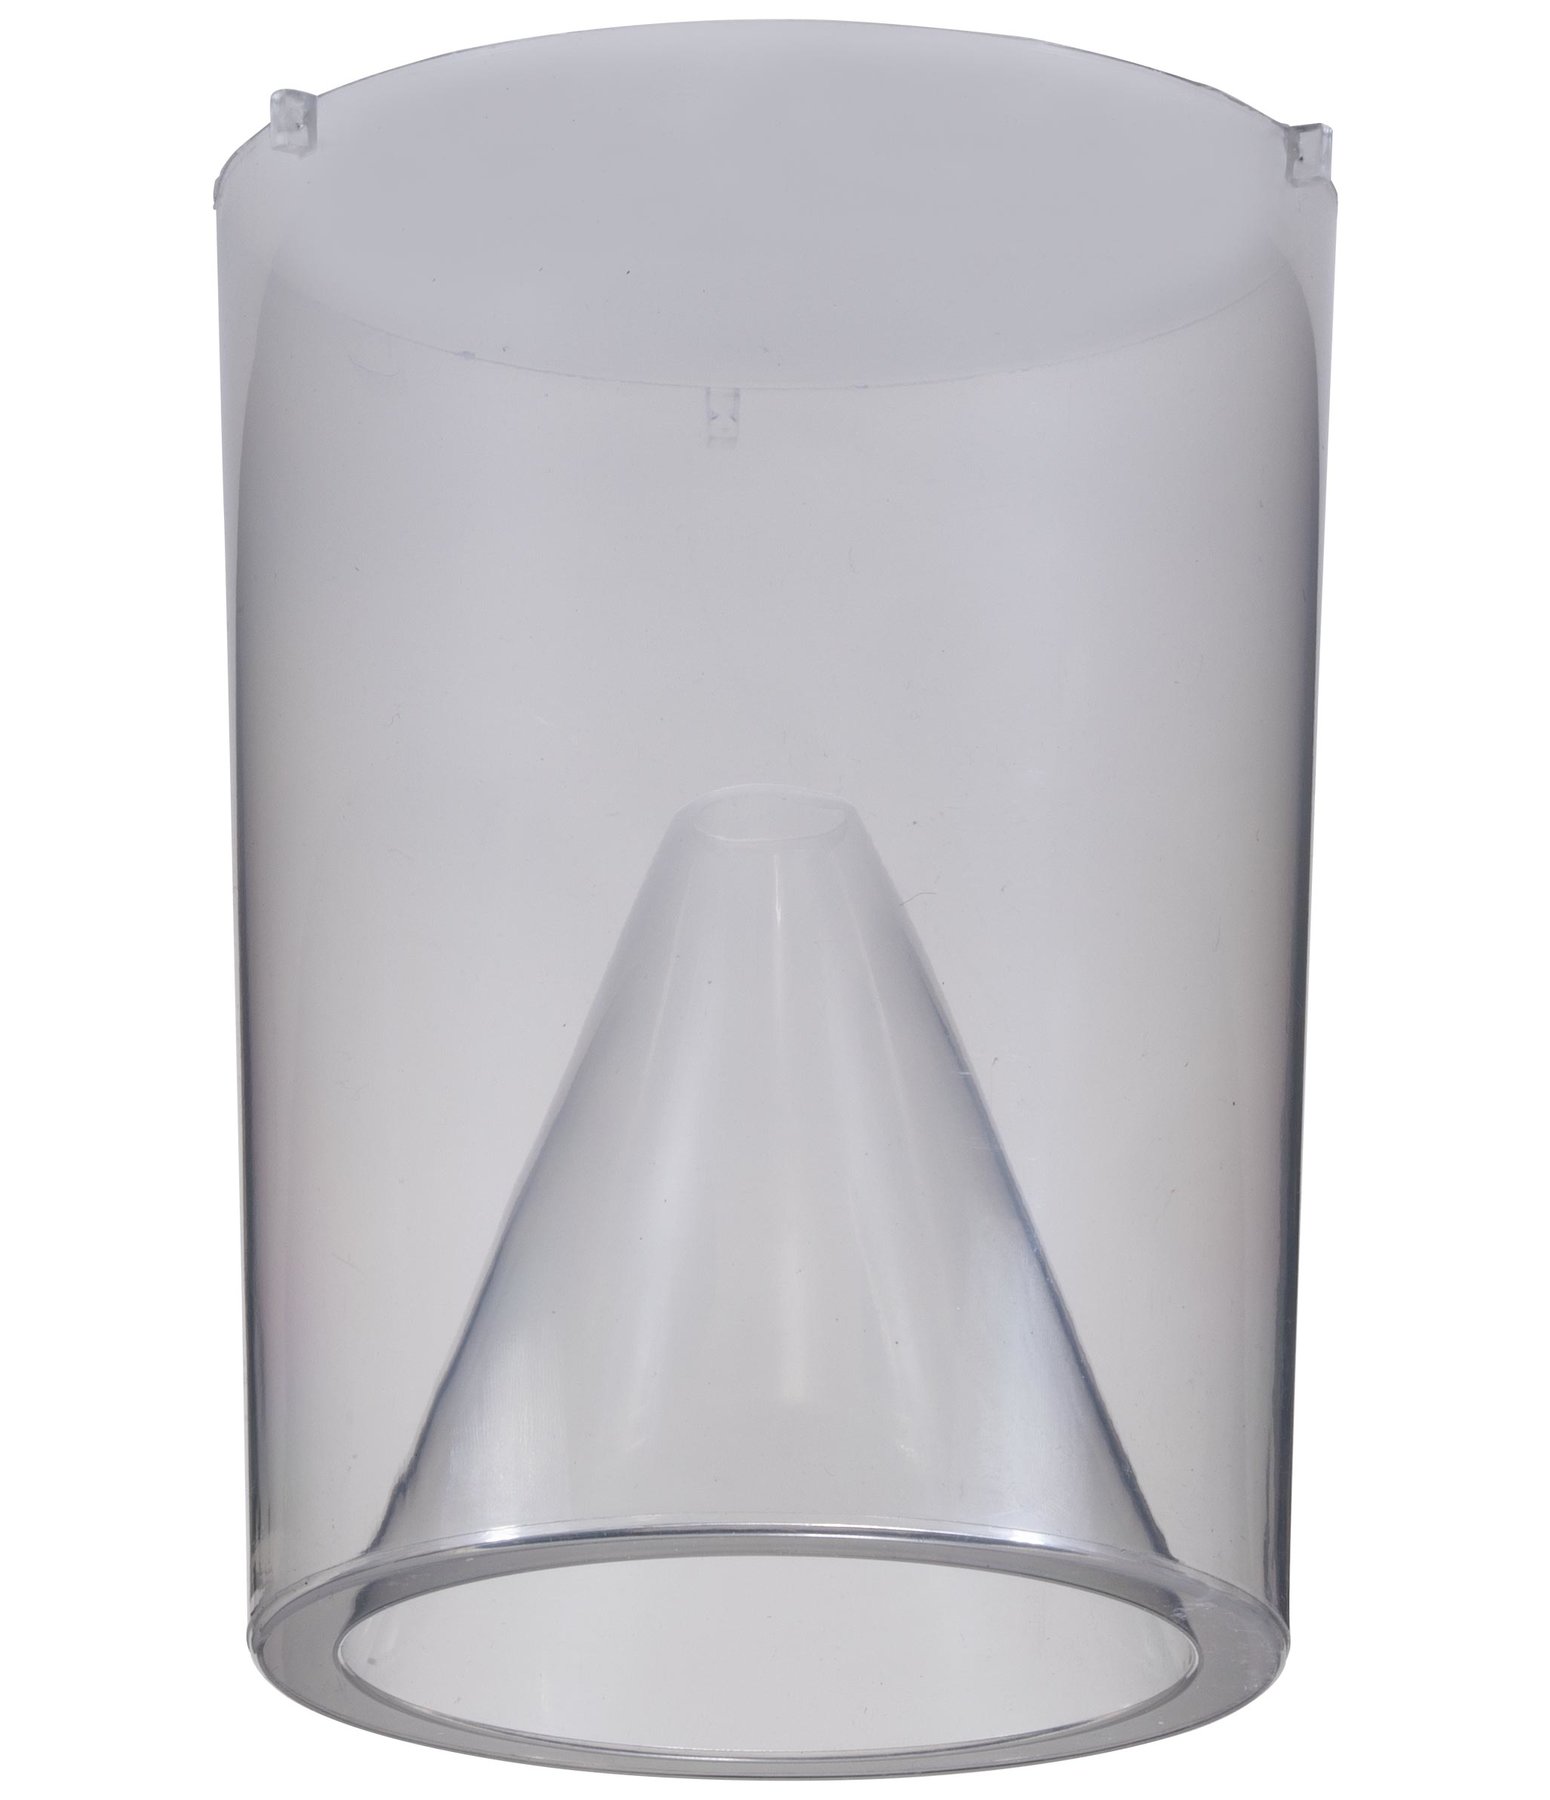 Replacement collection container for the TAON-X Horsefly Trap